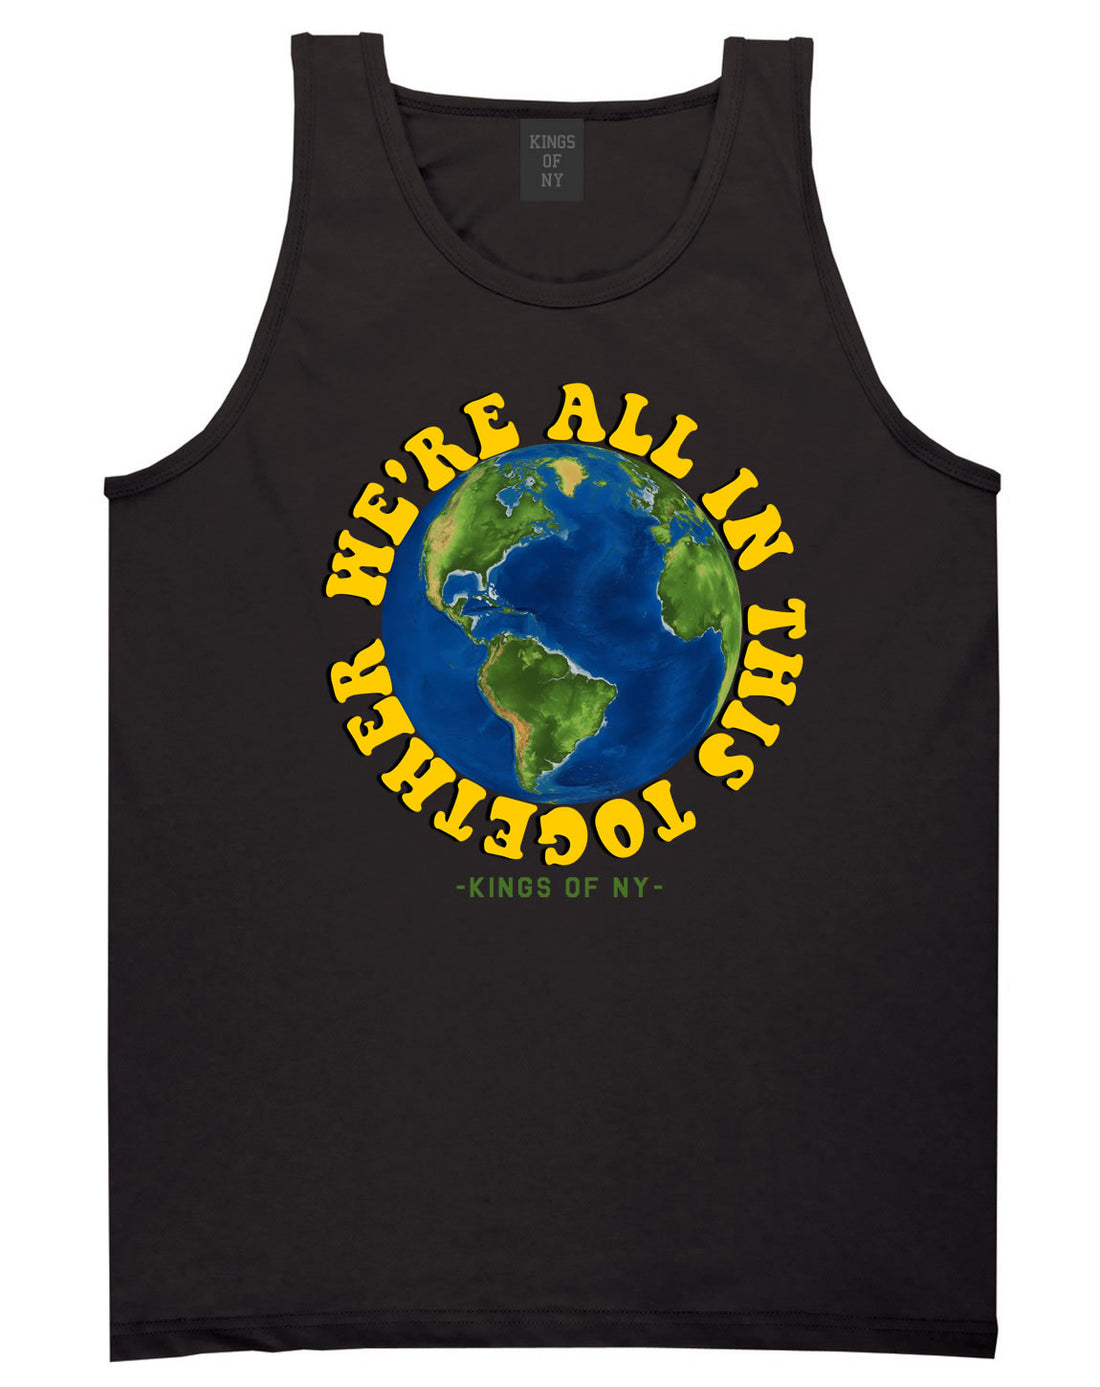 We're All In This Together Earth Mens Tank Top Shirt Black